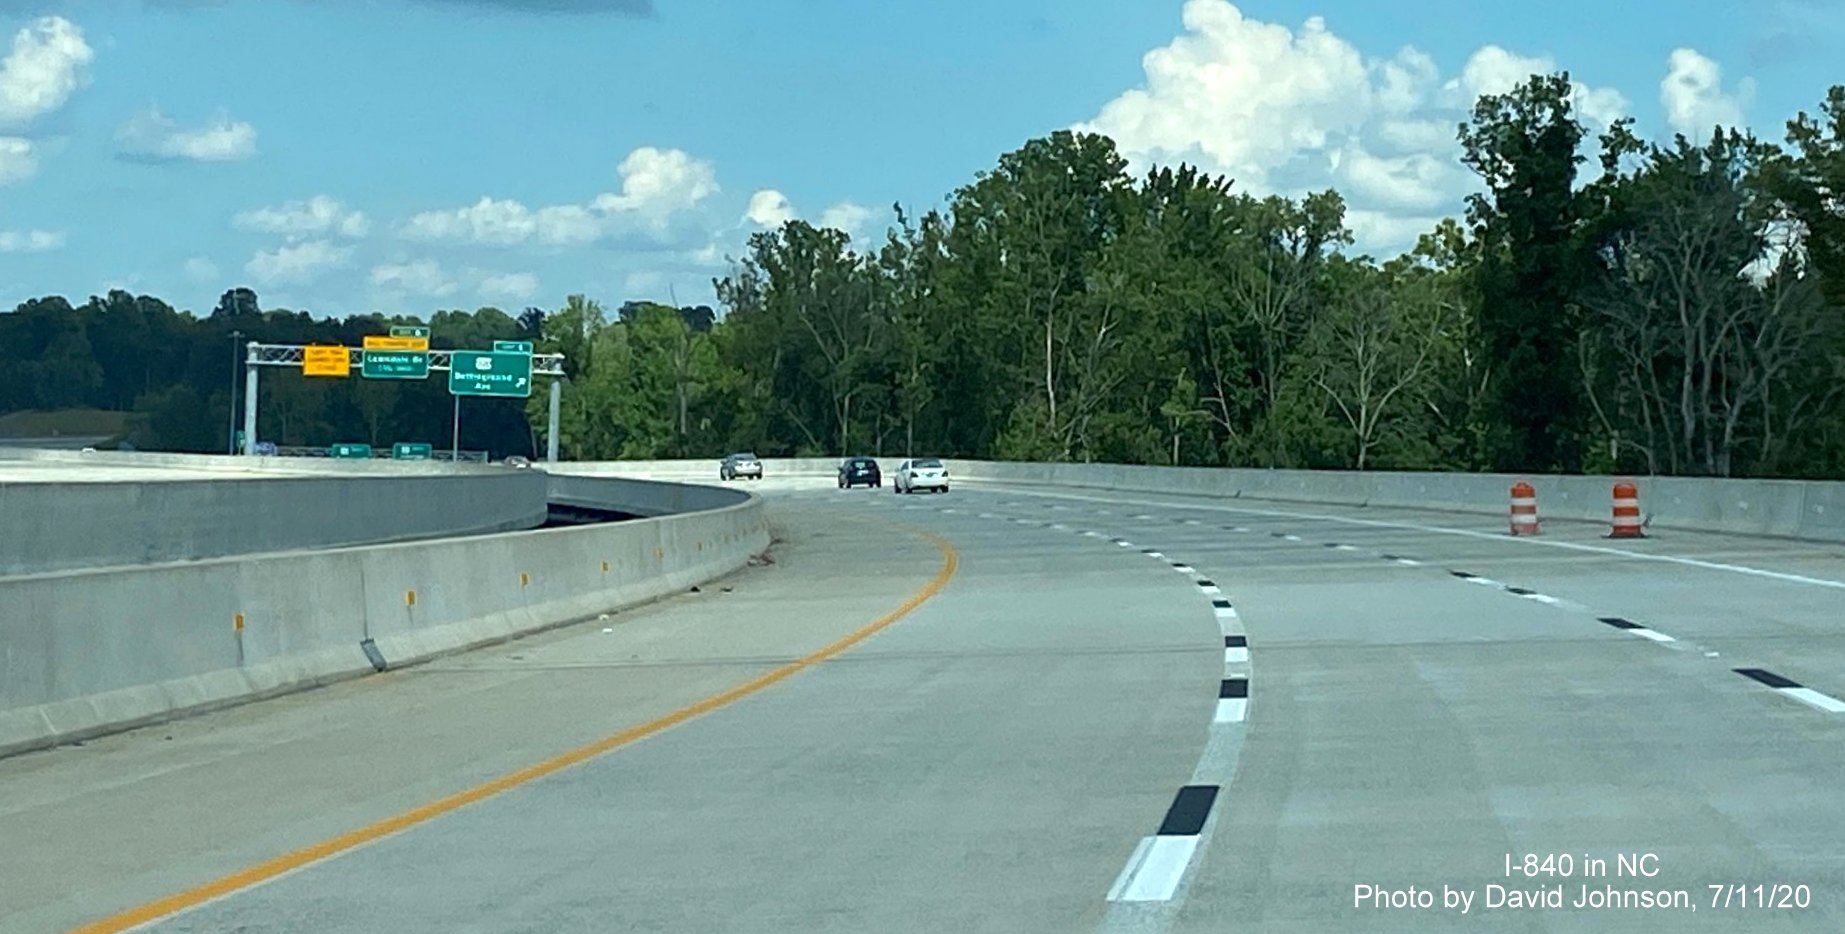 Image of I-840 East Greensboro Loop roadway prior to US 220 Battleground Avenue exit, by David Johnson July 2020